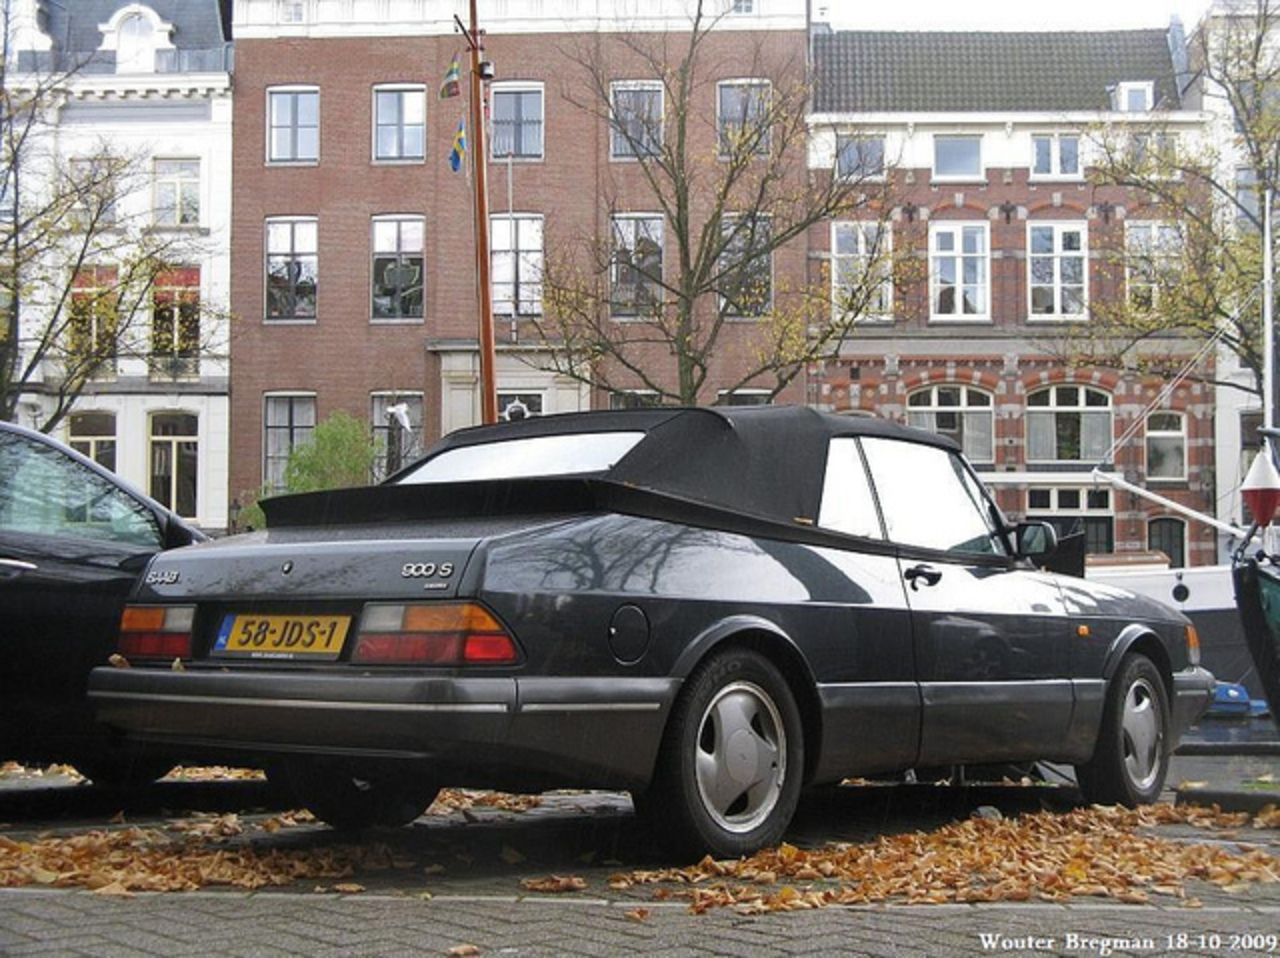 Flickr: The The "Classic" SAAB 900 Pool